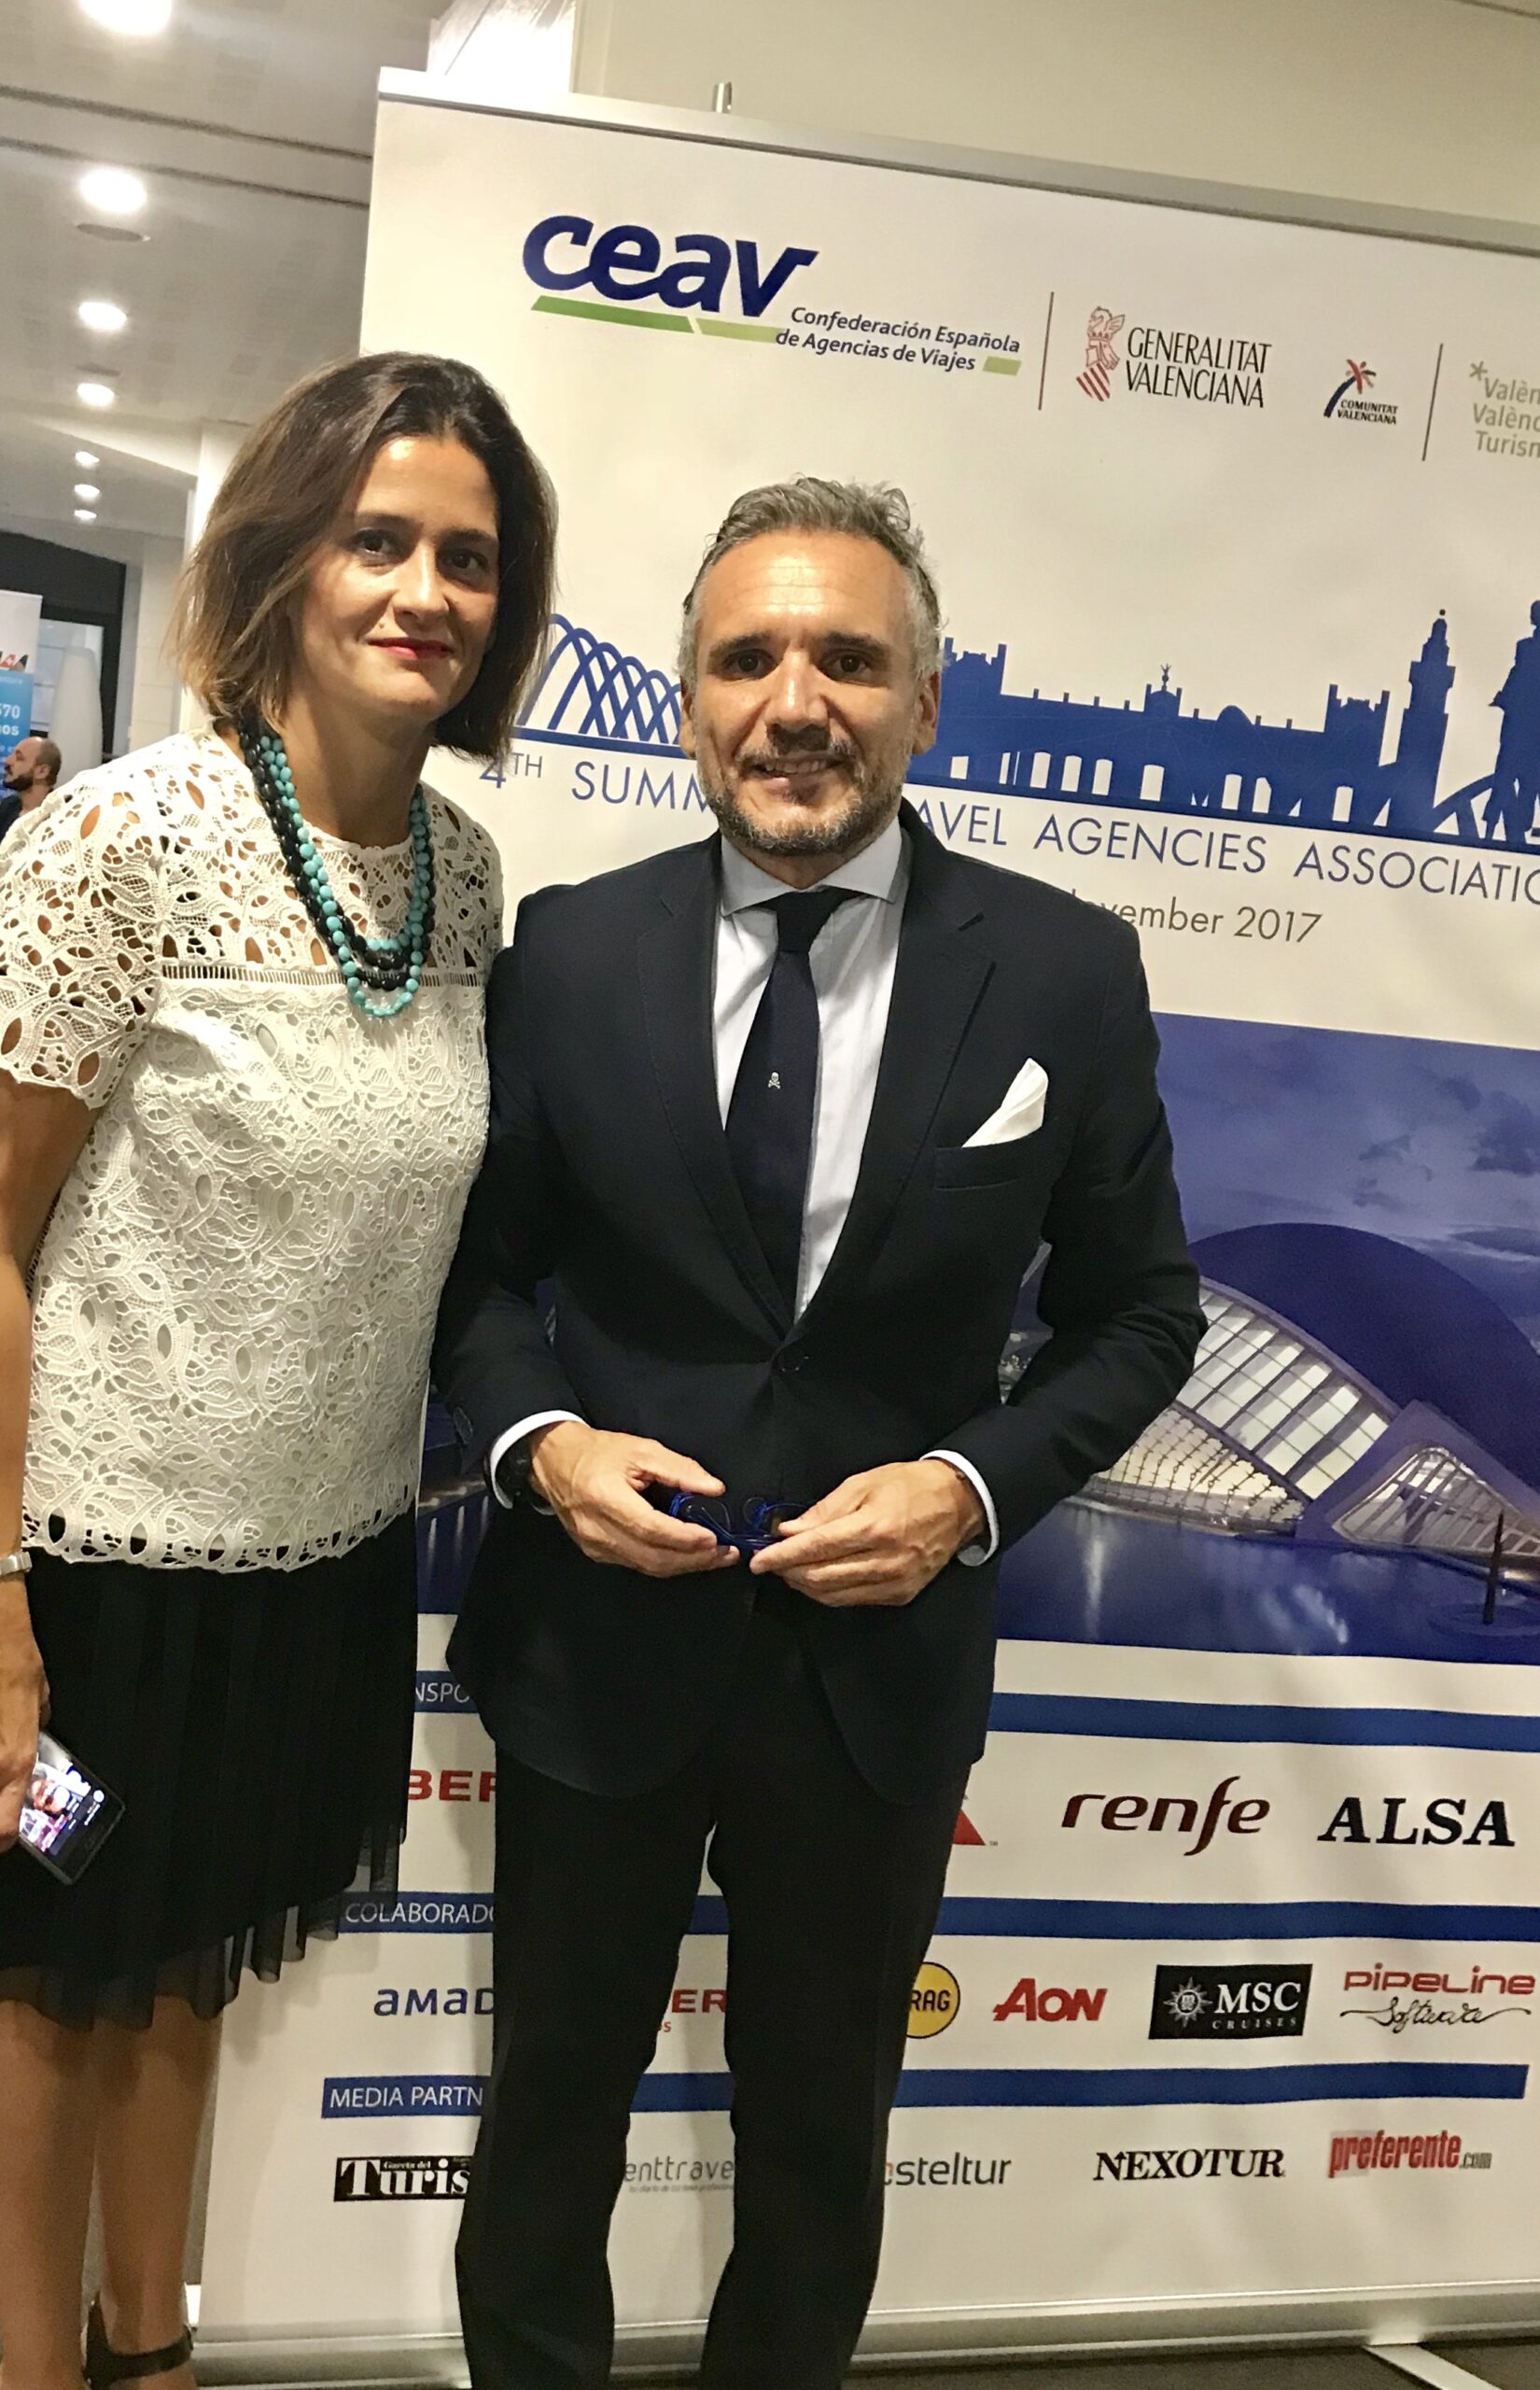 AVE Cities Network in Bilbao Travel Night, organized by the Spanish Confederation of Travel Agencies and Tourism (CEAV)